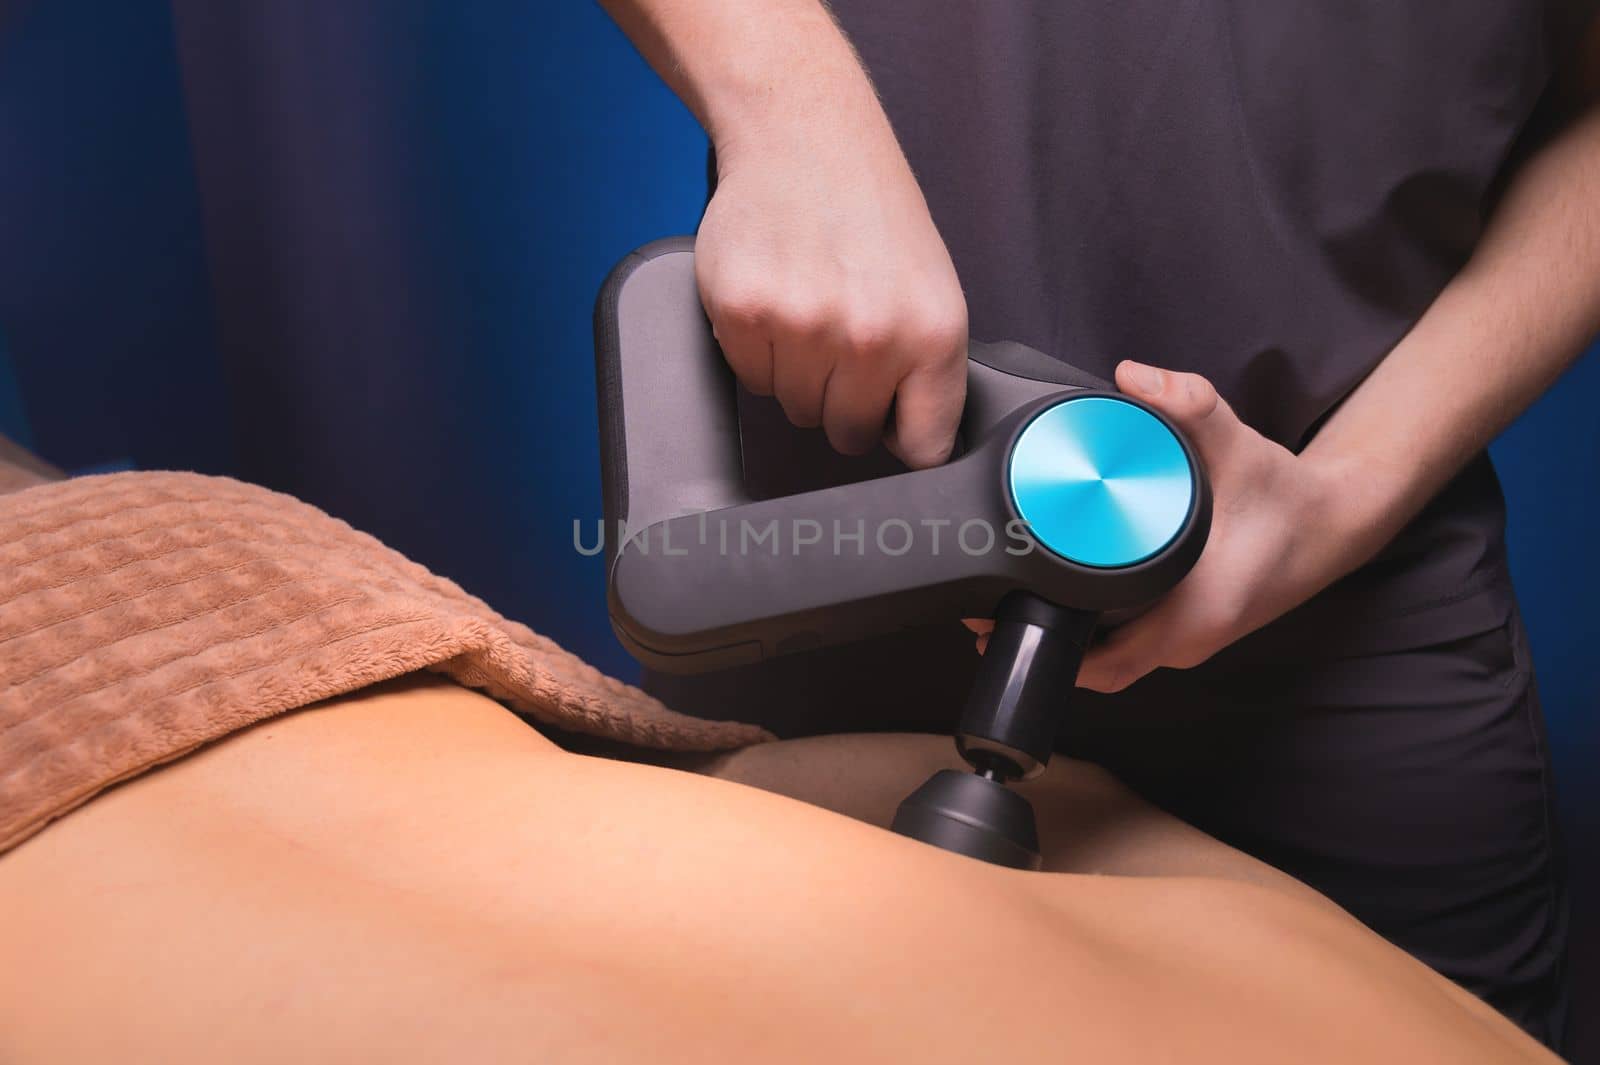 Percussive massager, sports man getting his back massaged to relieve pain, top side view close-up.